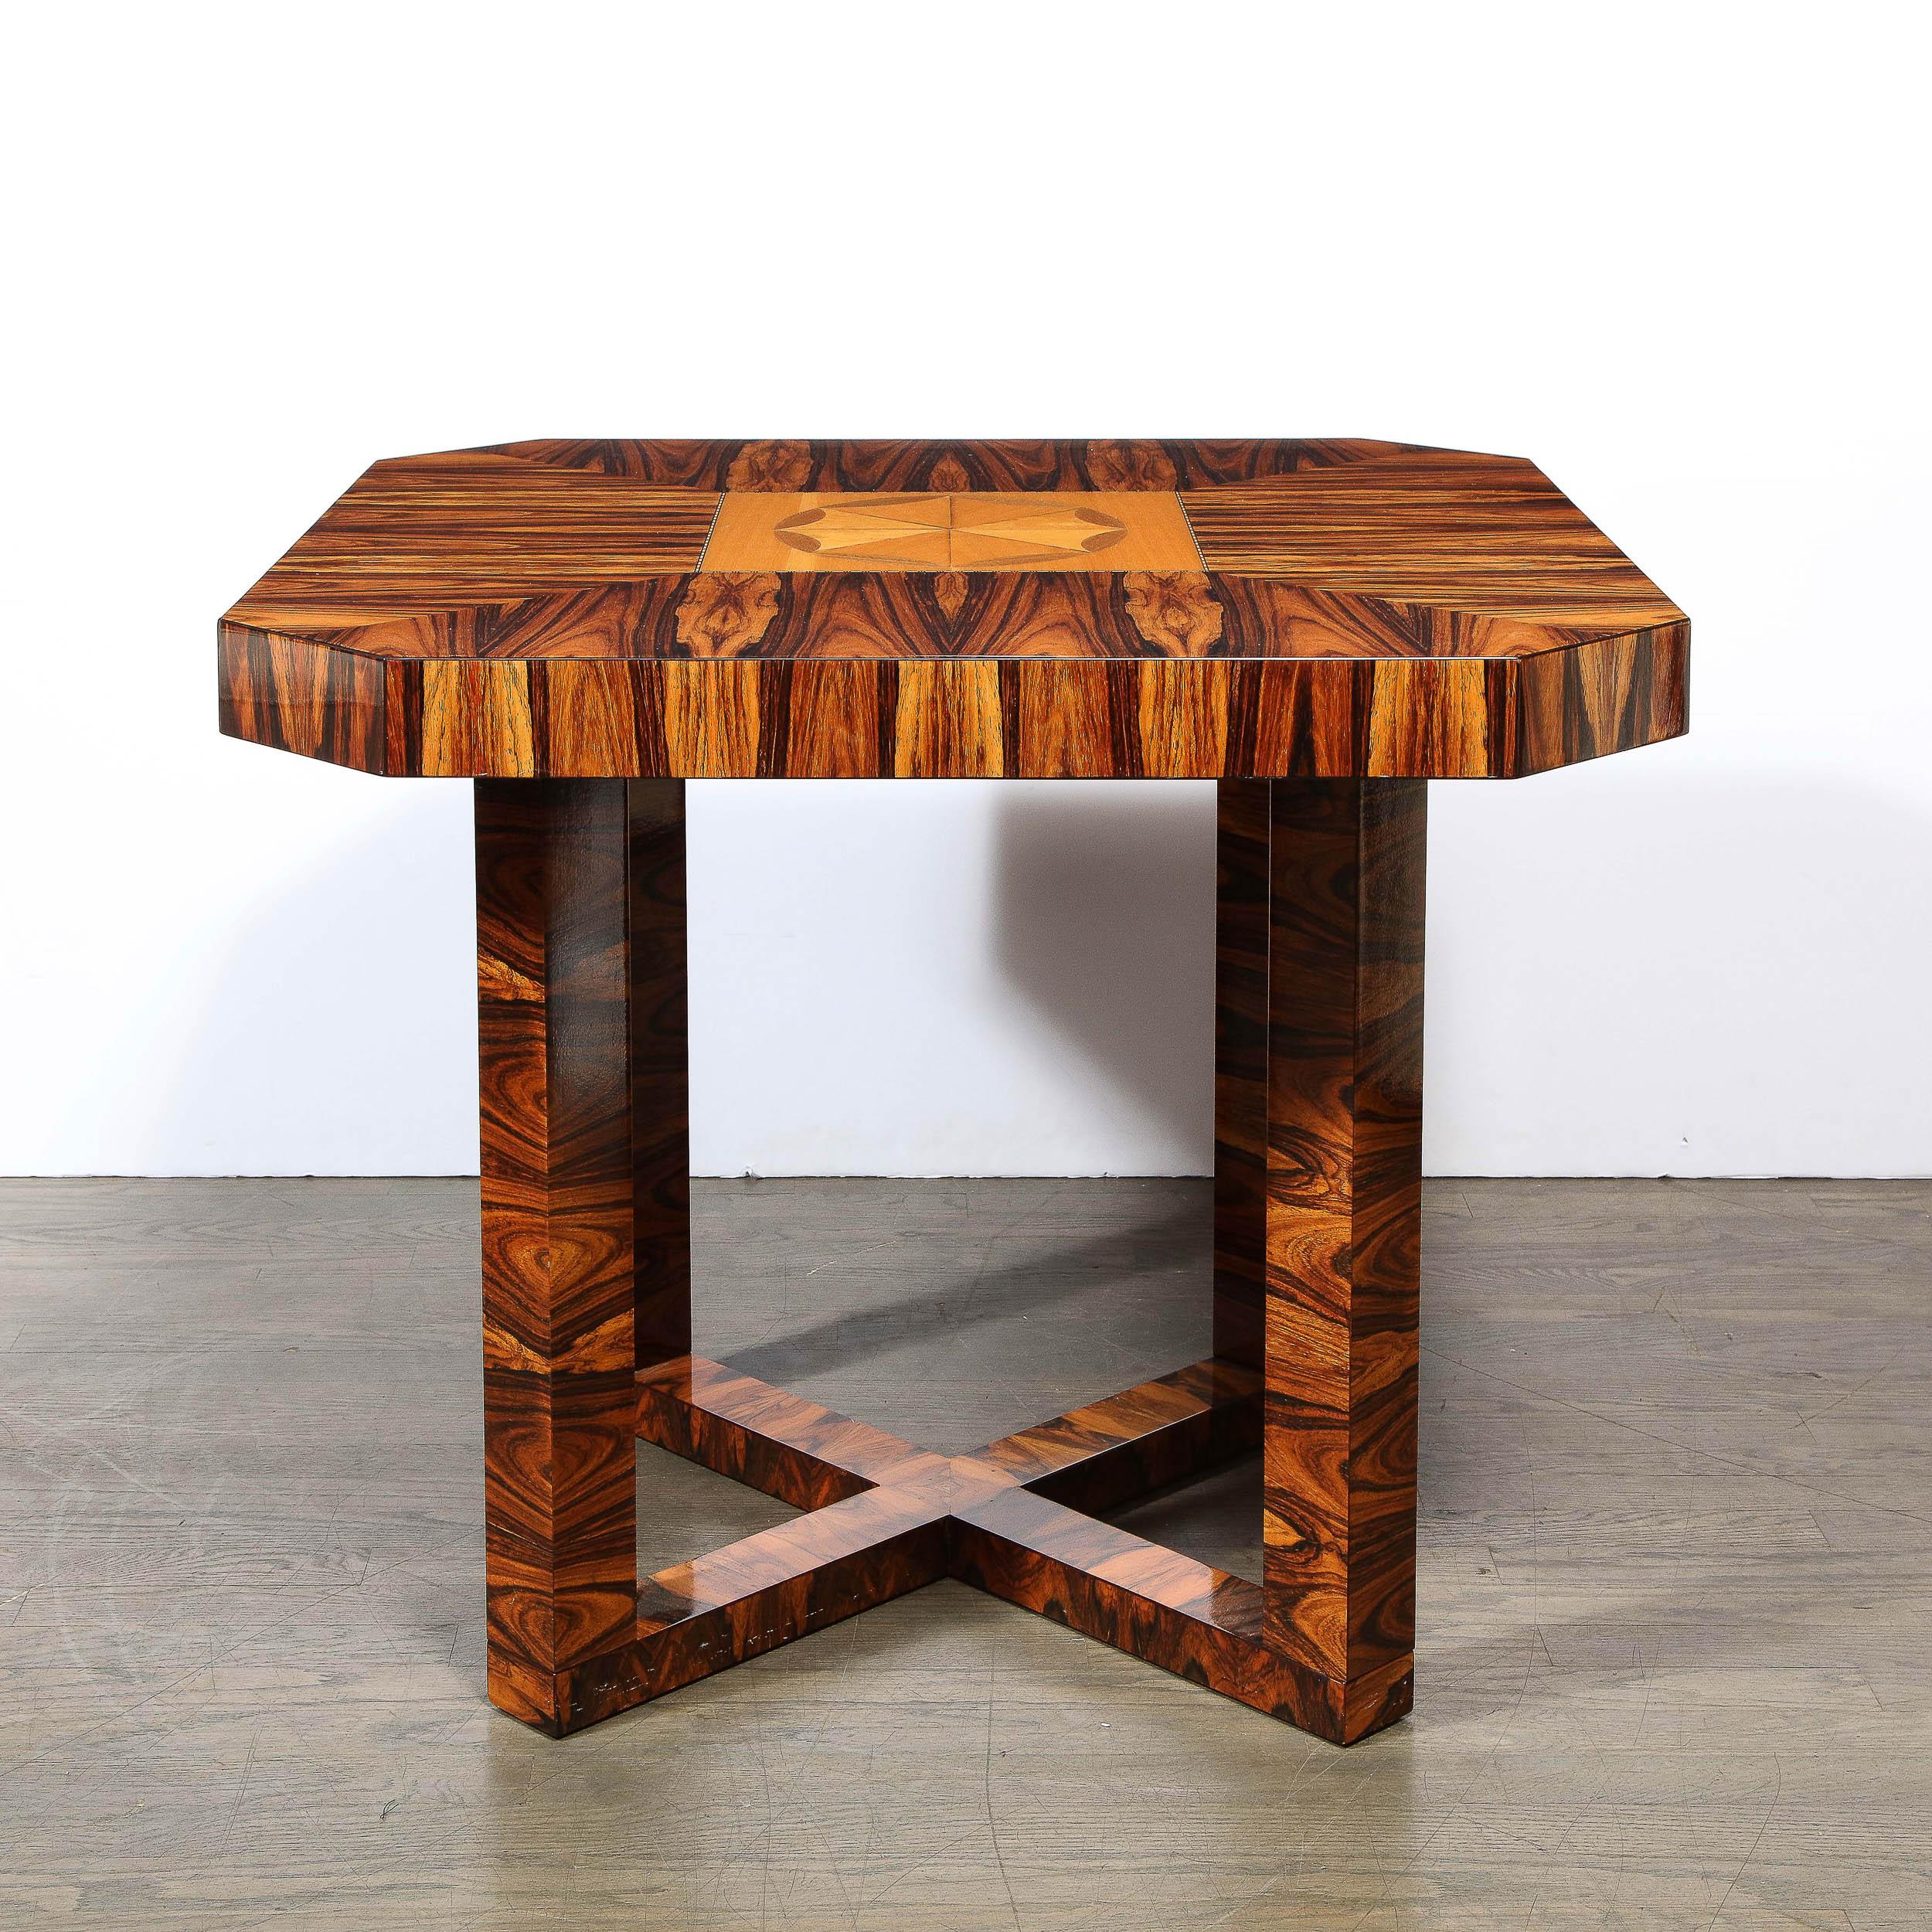 This sophisticated Art Deco table was realized in France circa 1930. It features an x form base with streamlined supports and an octagonal top (formed from a square with cut corners)- all in beautiful bookmatched zebrawood showcasing a dramatic